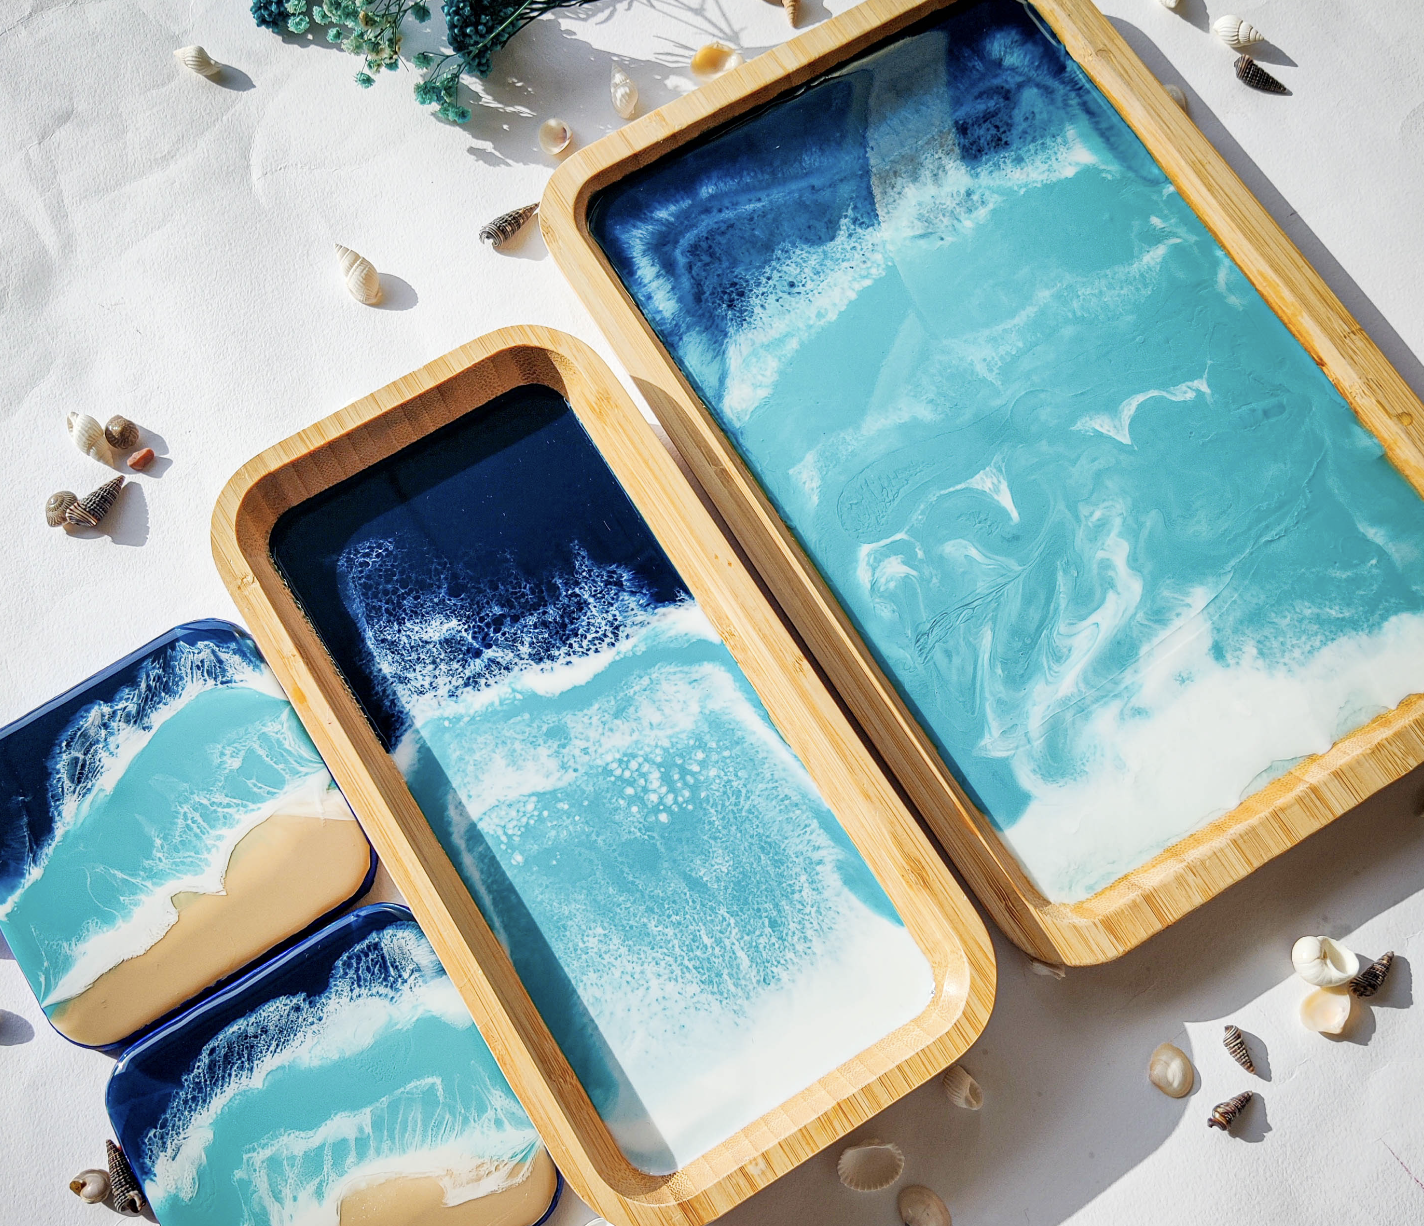 Ocean Art: Flow with the Waves with Twinkle Suba